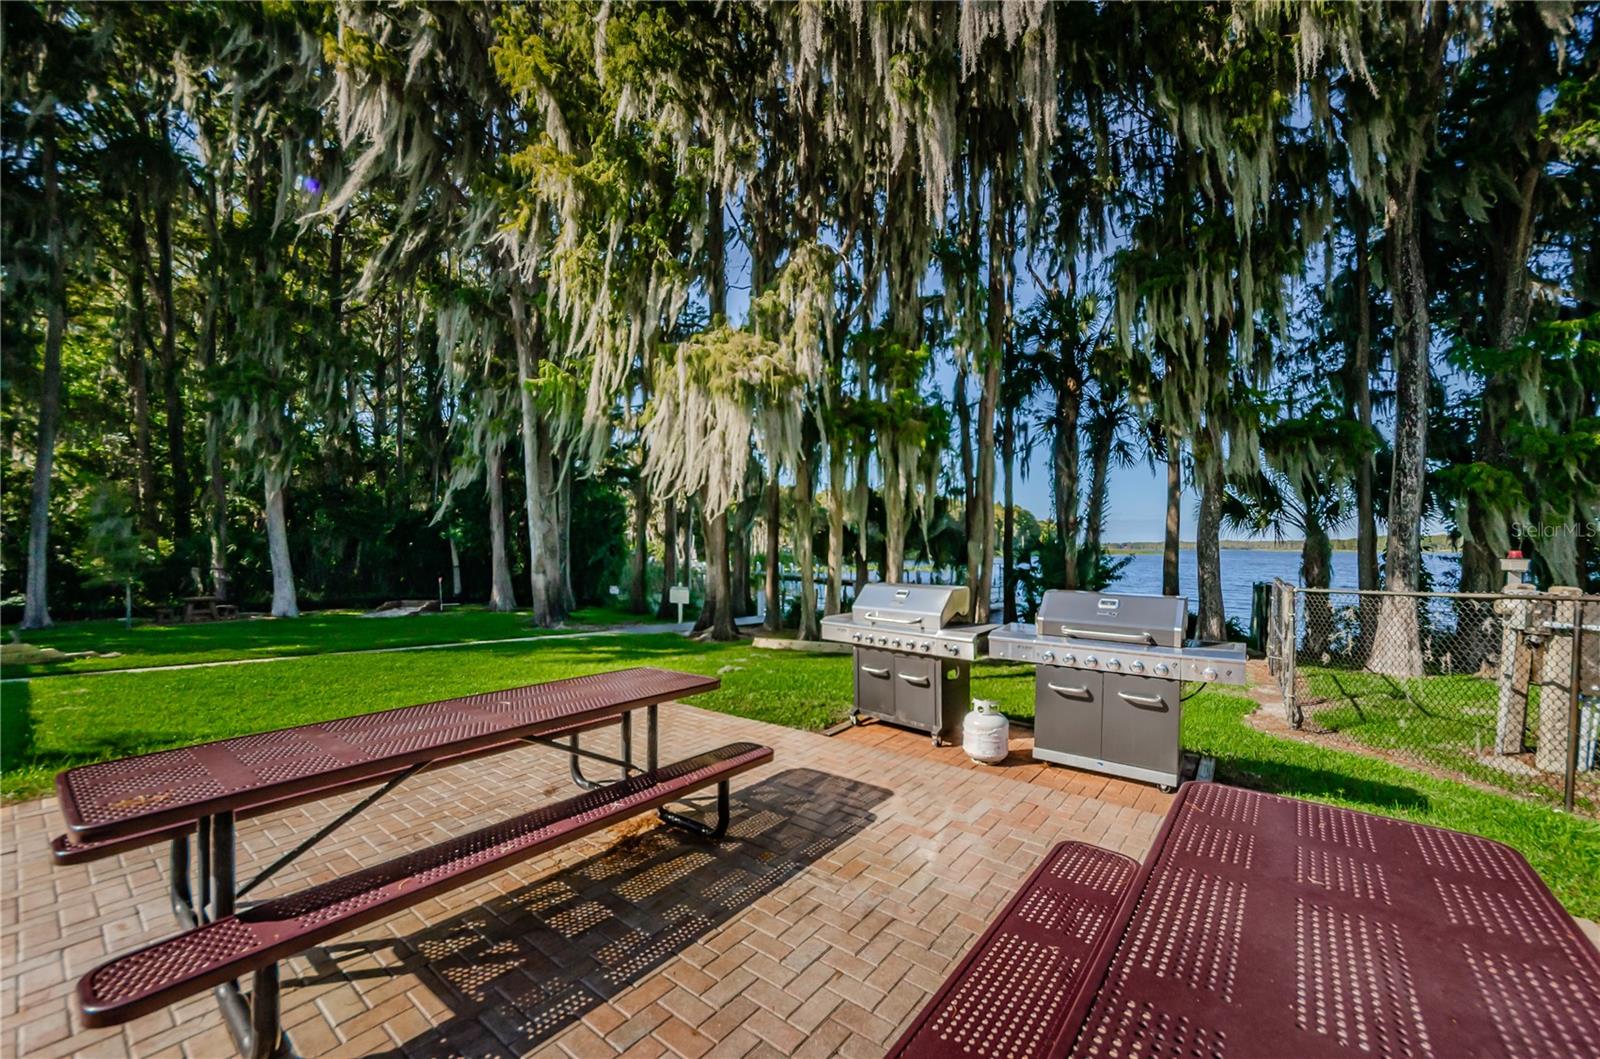 Enjoy Grilling by the Lake.